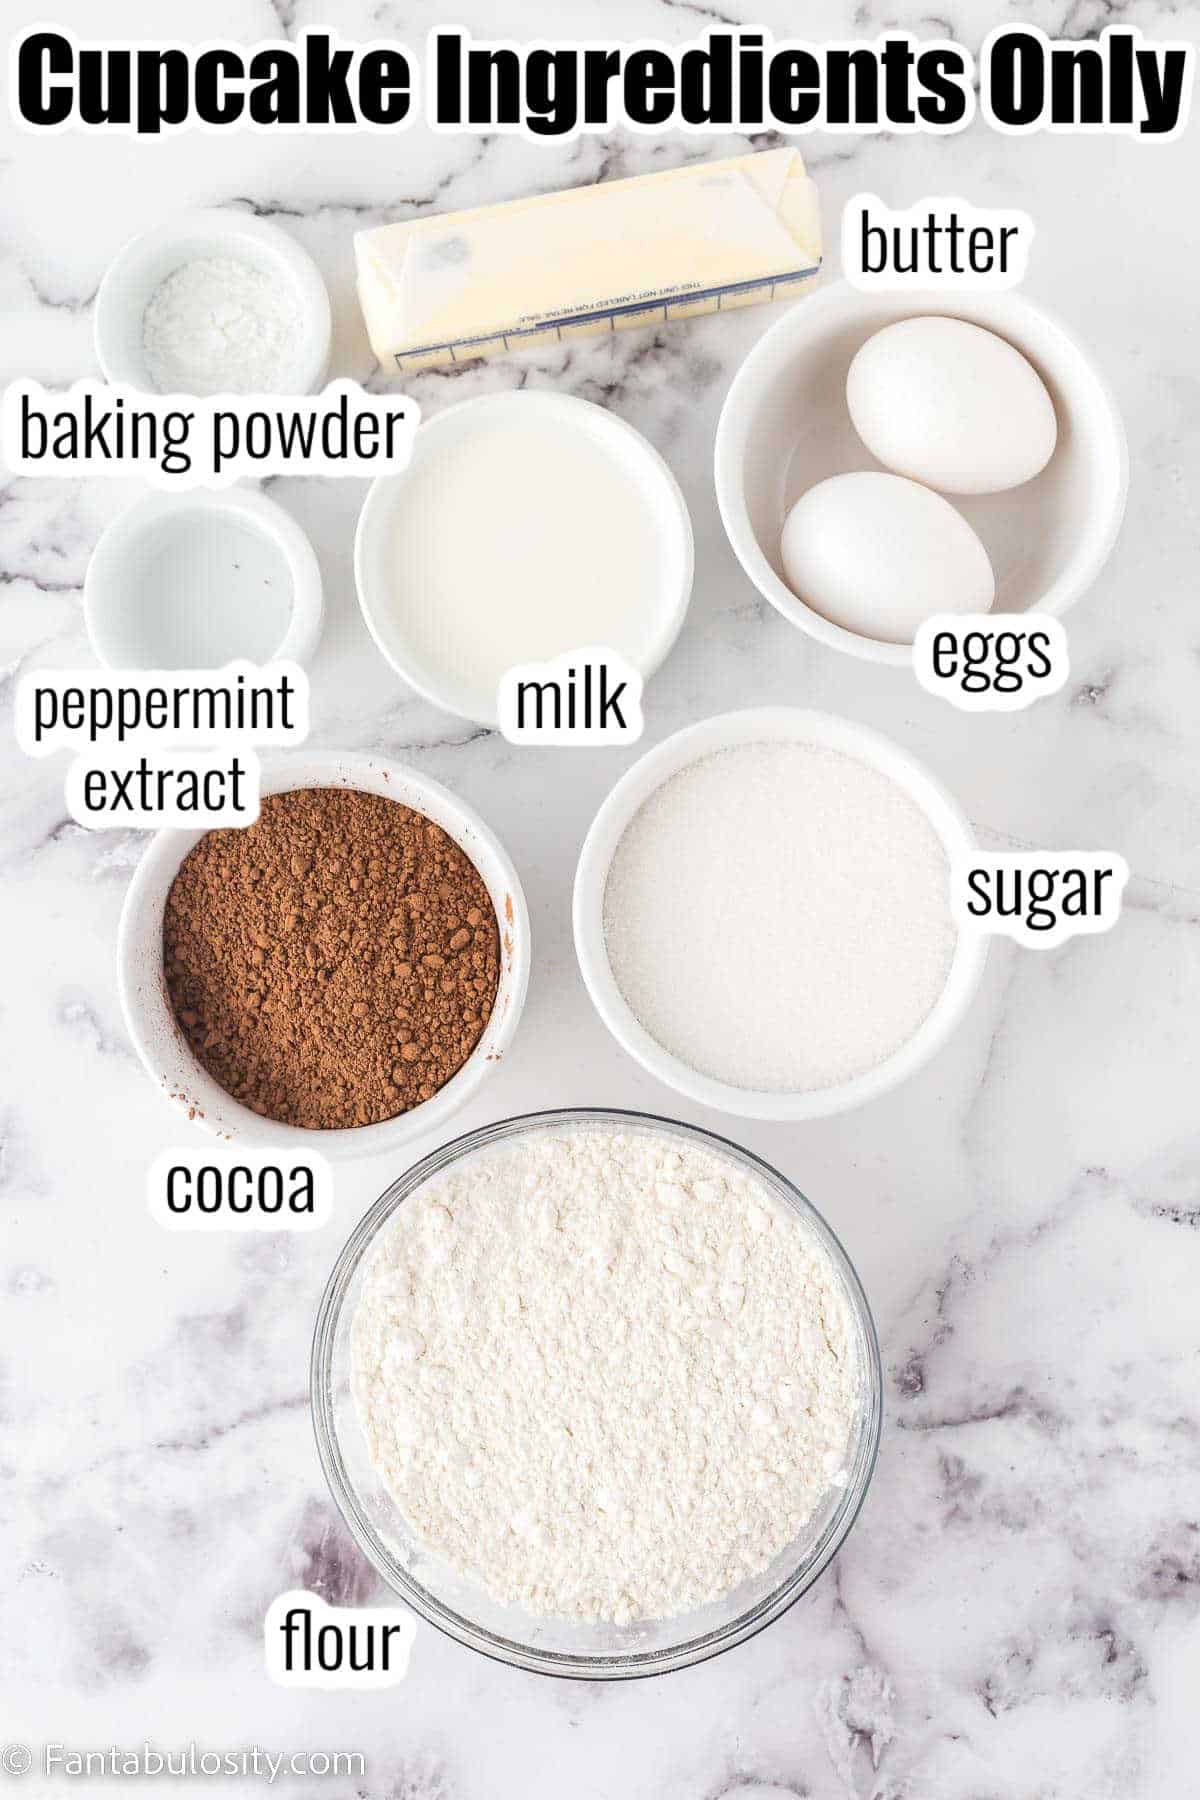 Labeled ingredients for mint chocolate cupcakes.